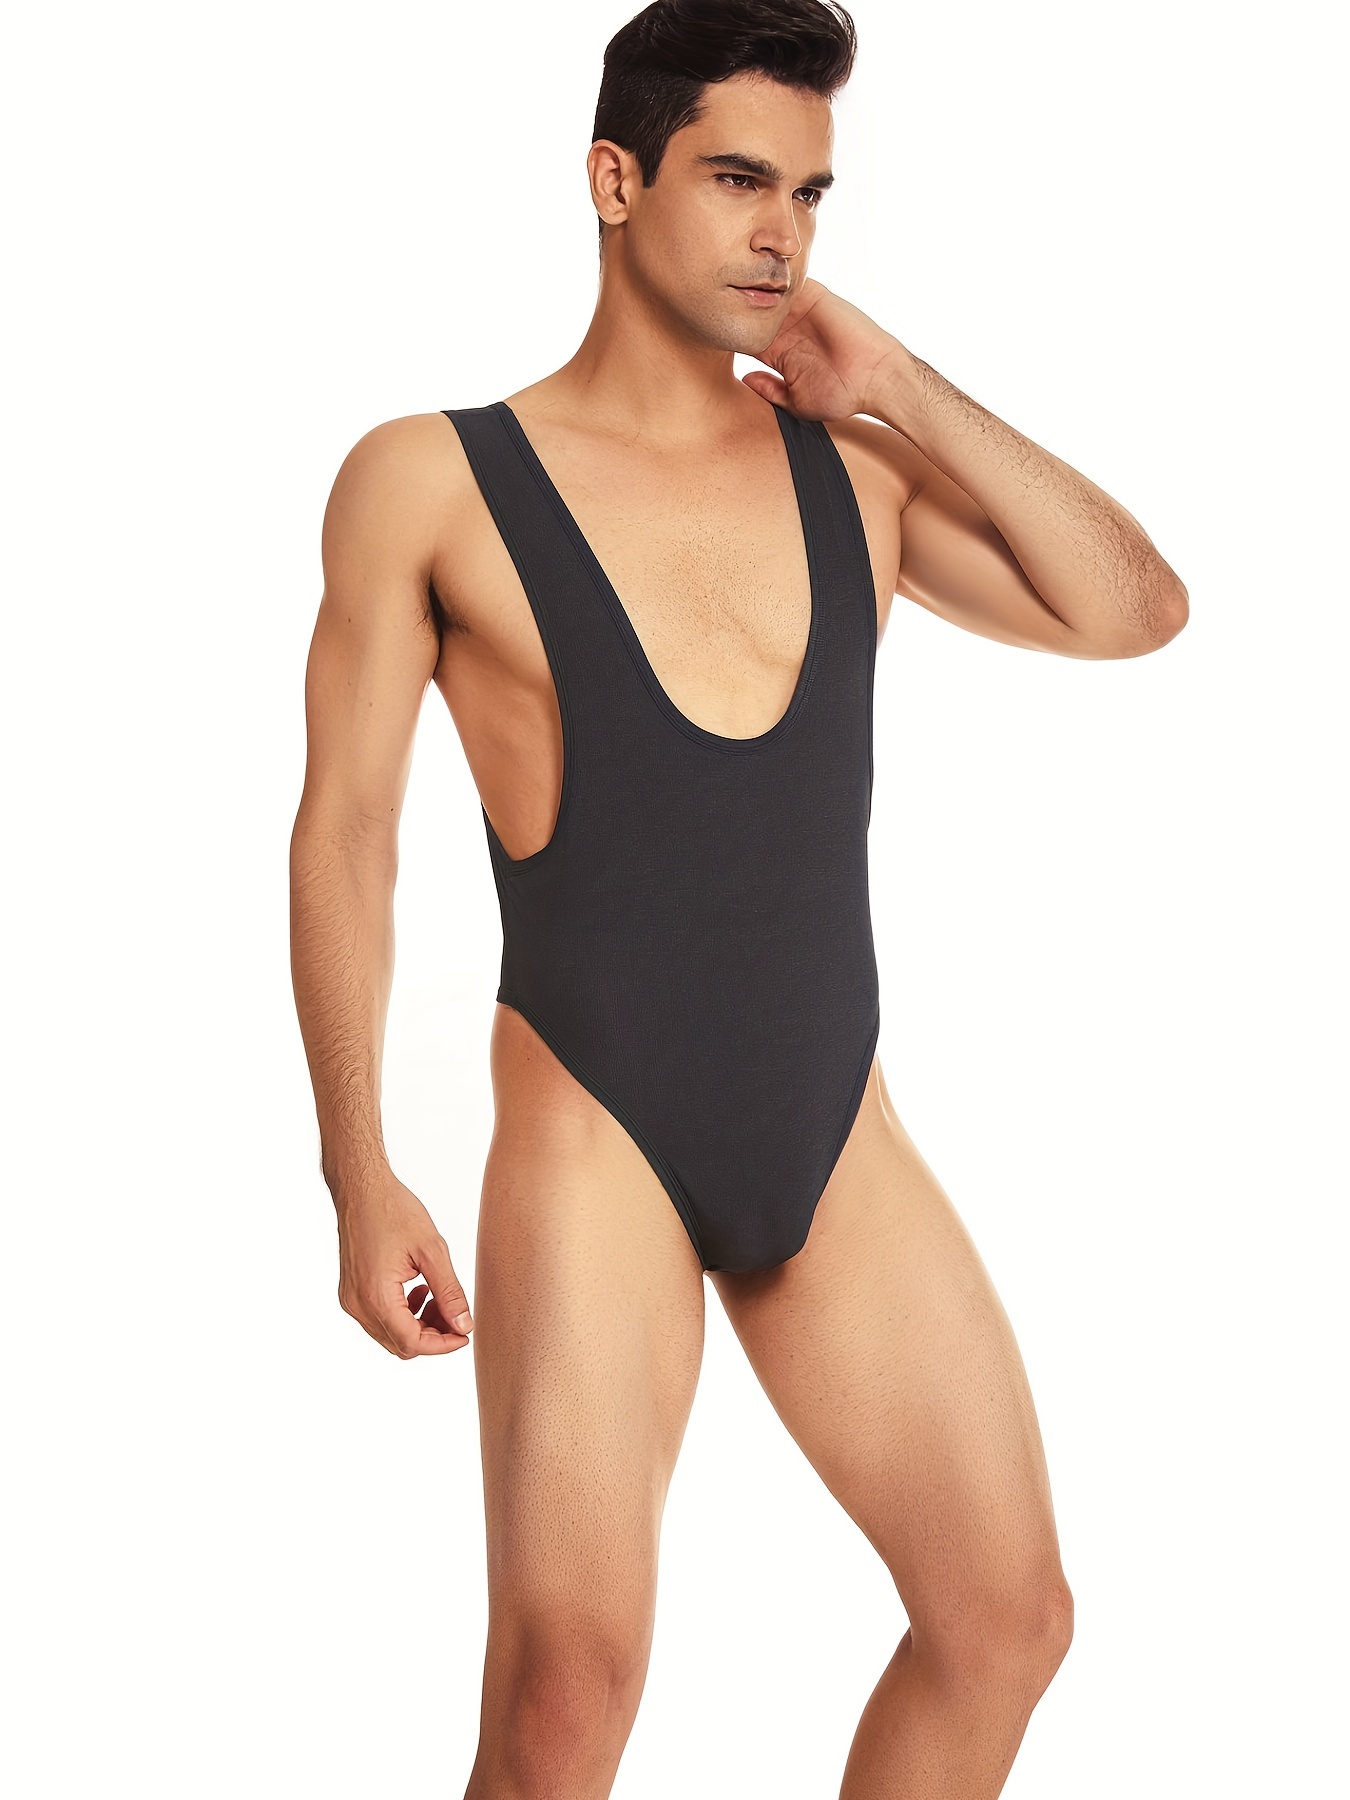 New Design one piece thong leotard For Unisex Use 